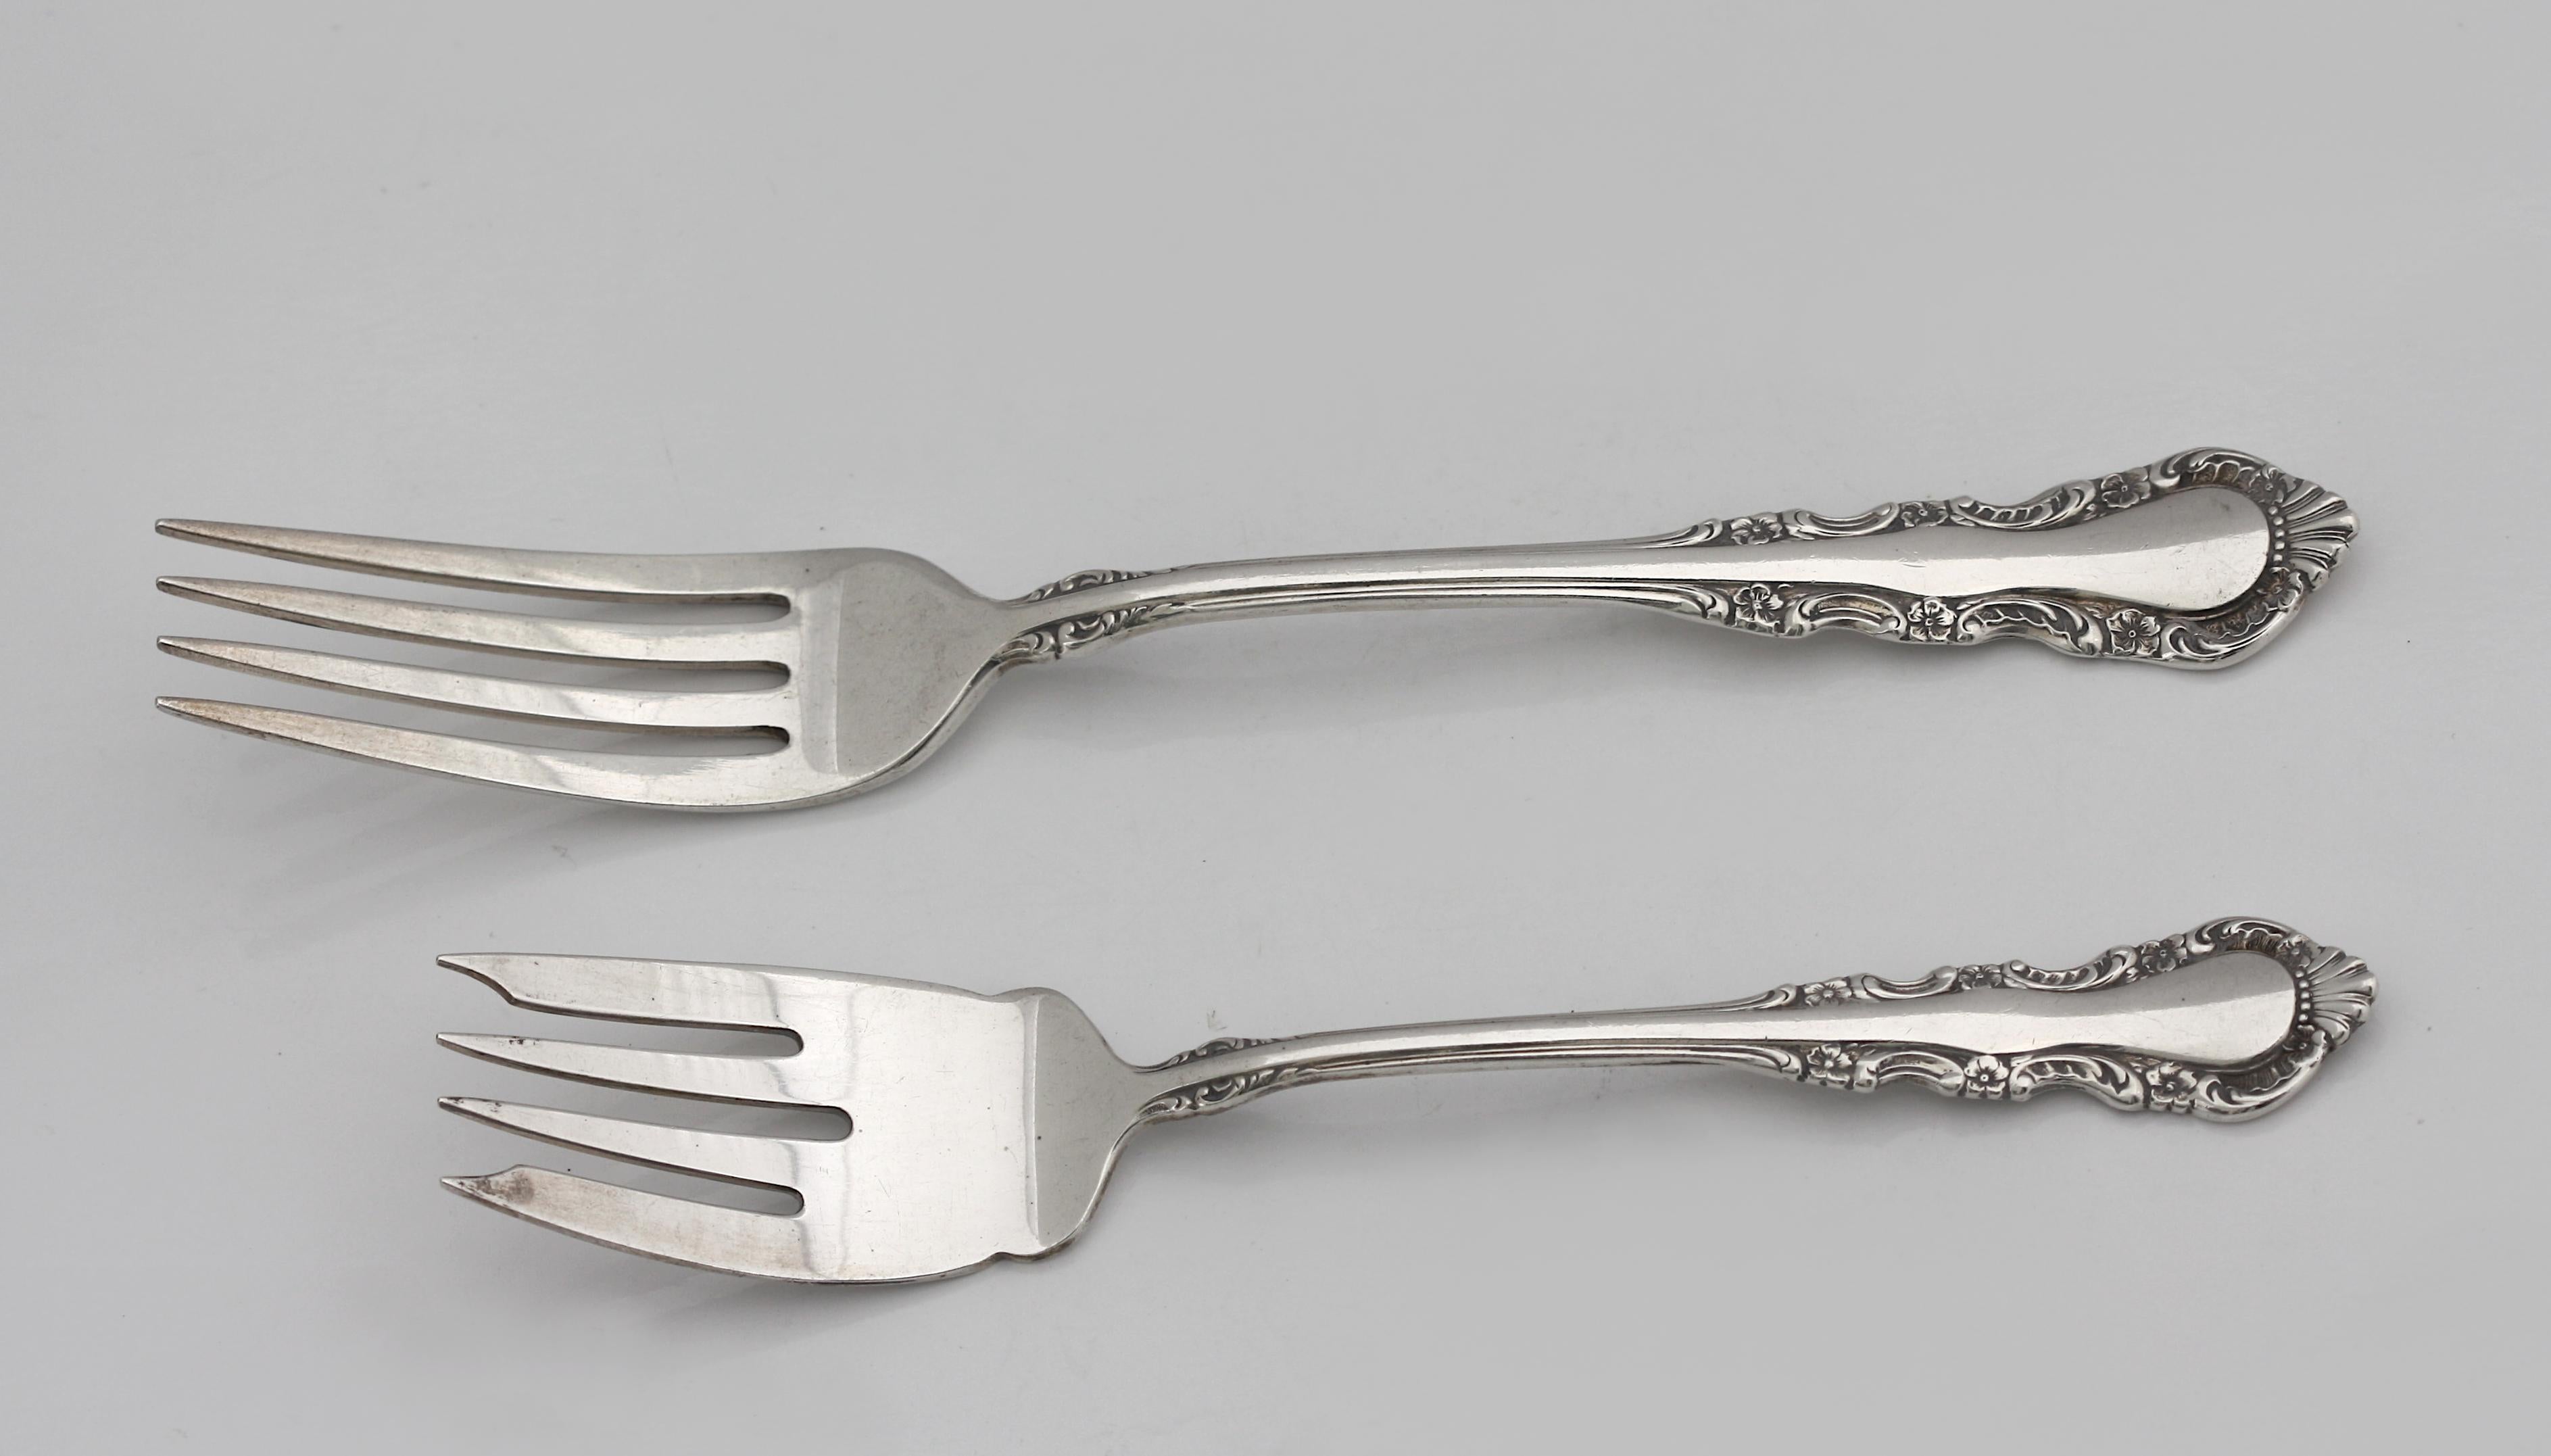  Reed & Barton Sterling Silver Fifty-Nine Piece Flatware Service  In Good Condition For Sale In West Palm Beach, FL